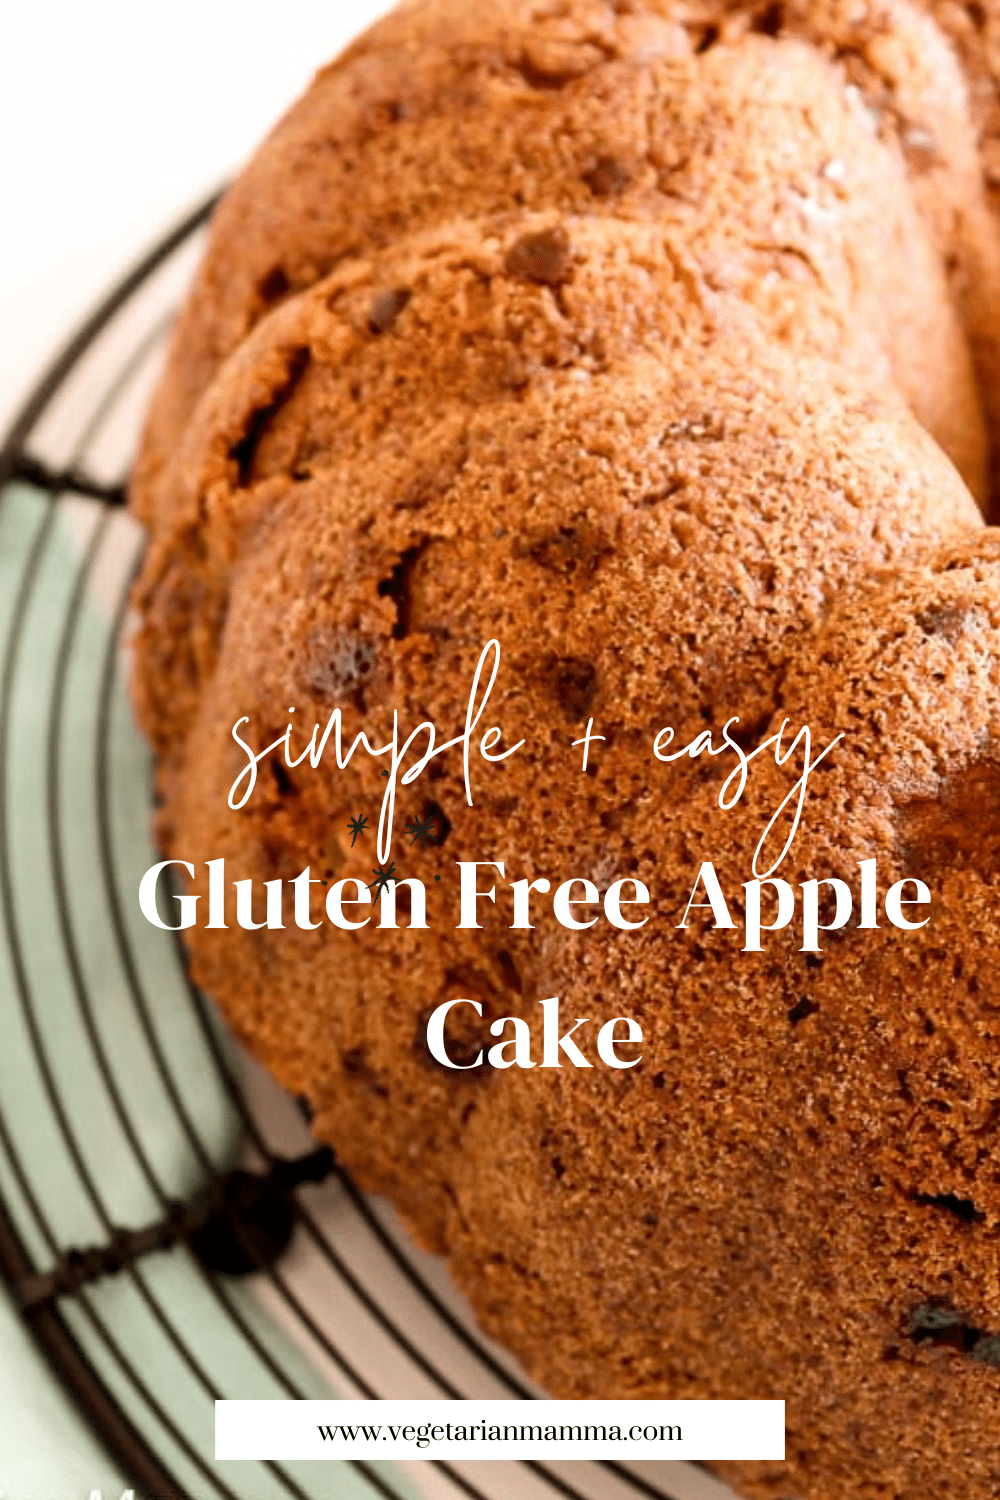 Gluten Free Easy Apple Cake is perfect for those moments when you want a sweet treat but do not want to slave over a complicated recipe.